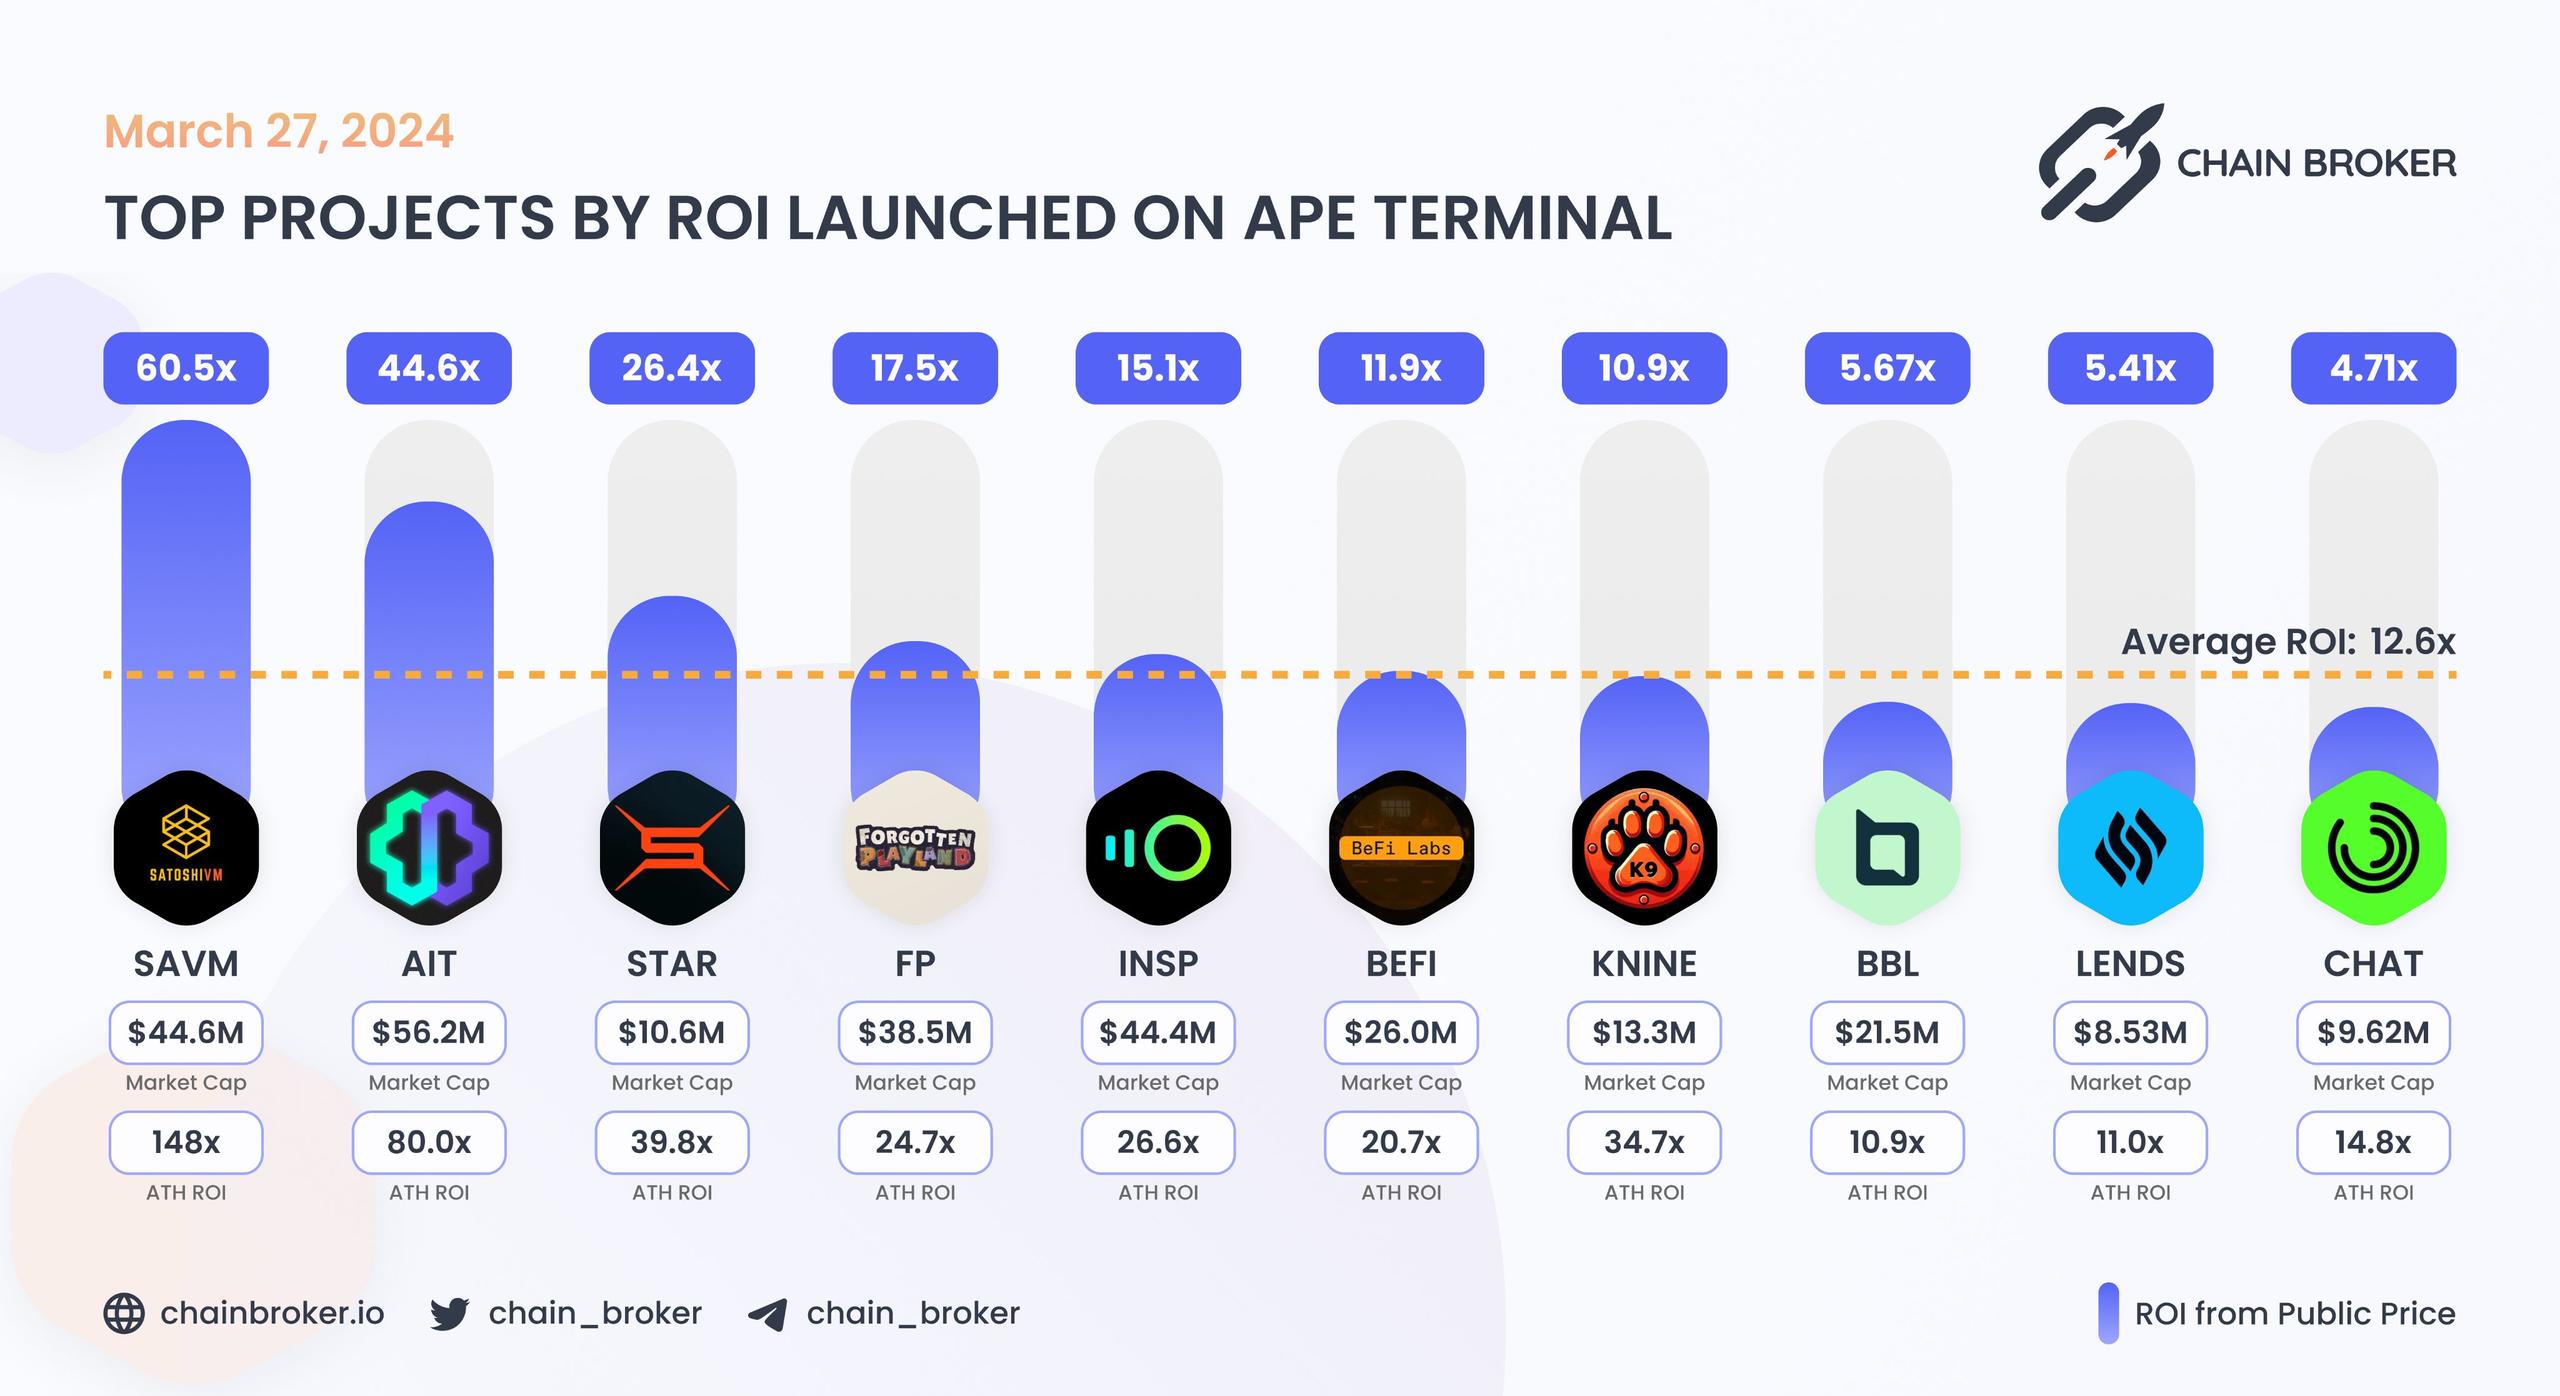 Top projects by ROI launched on Ape Terminal